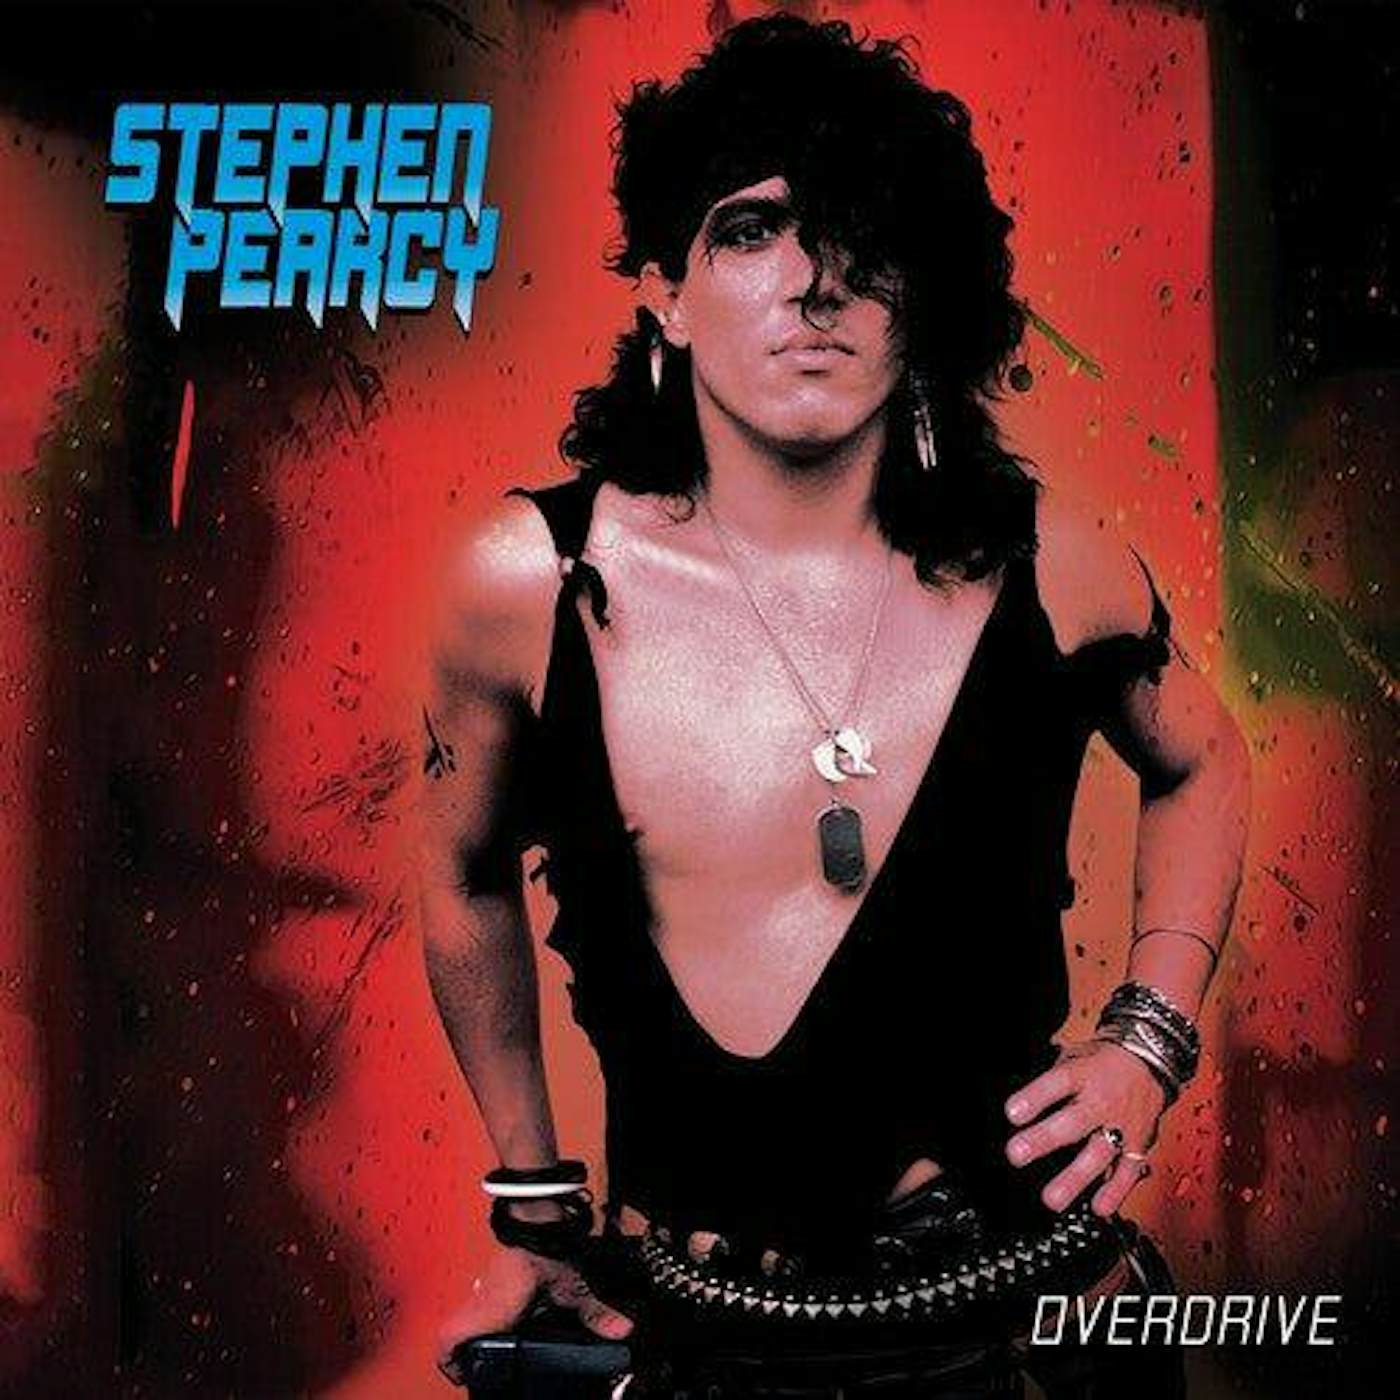 Stephen Pearcy Overdrive (Red Marble) Vinyl Record